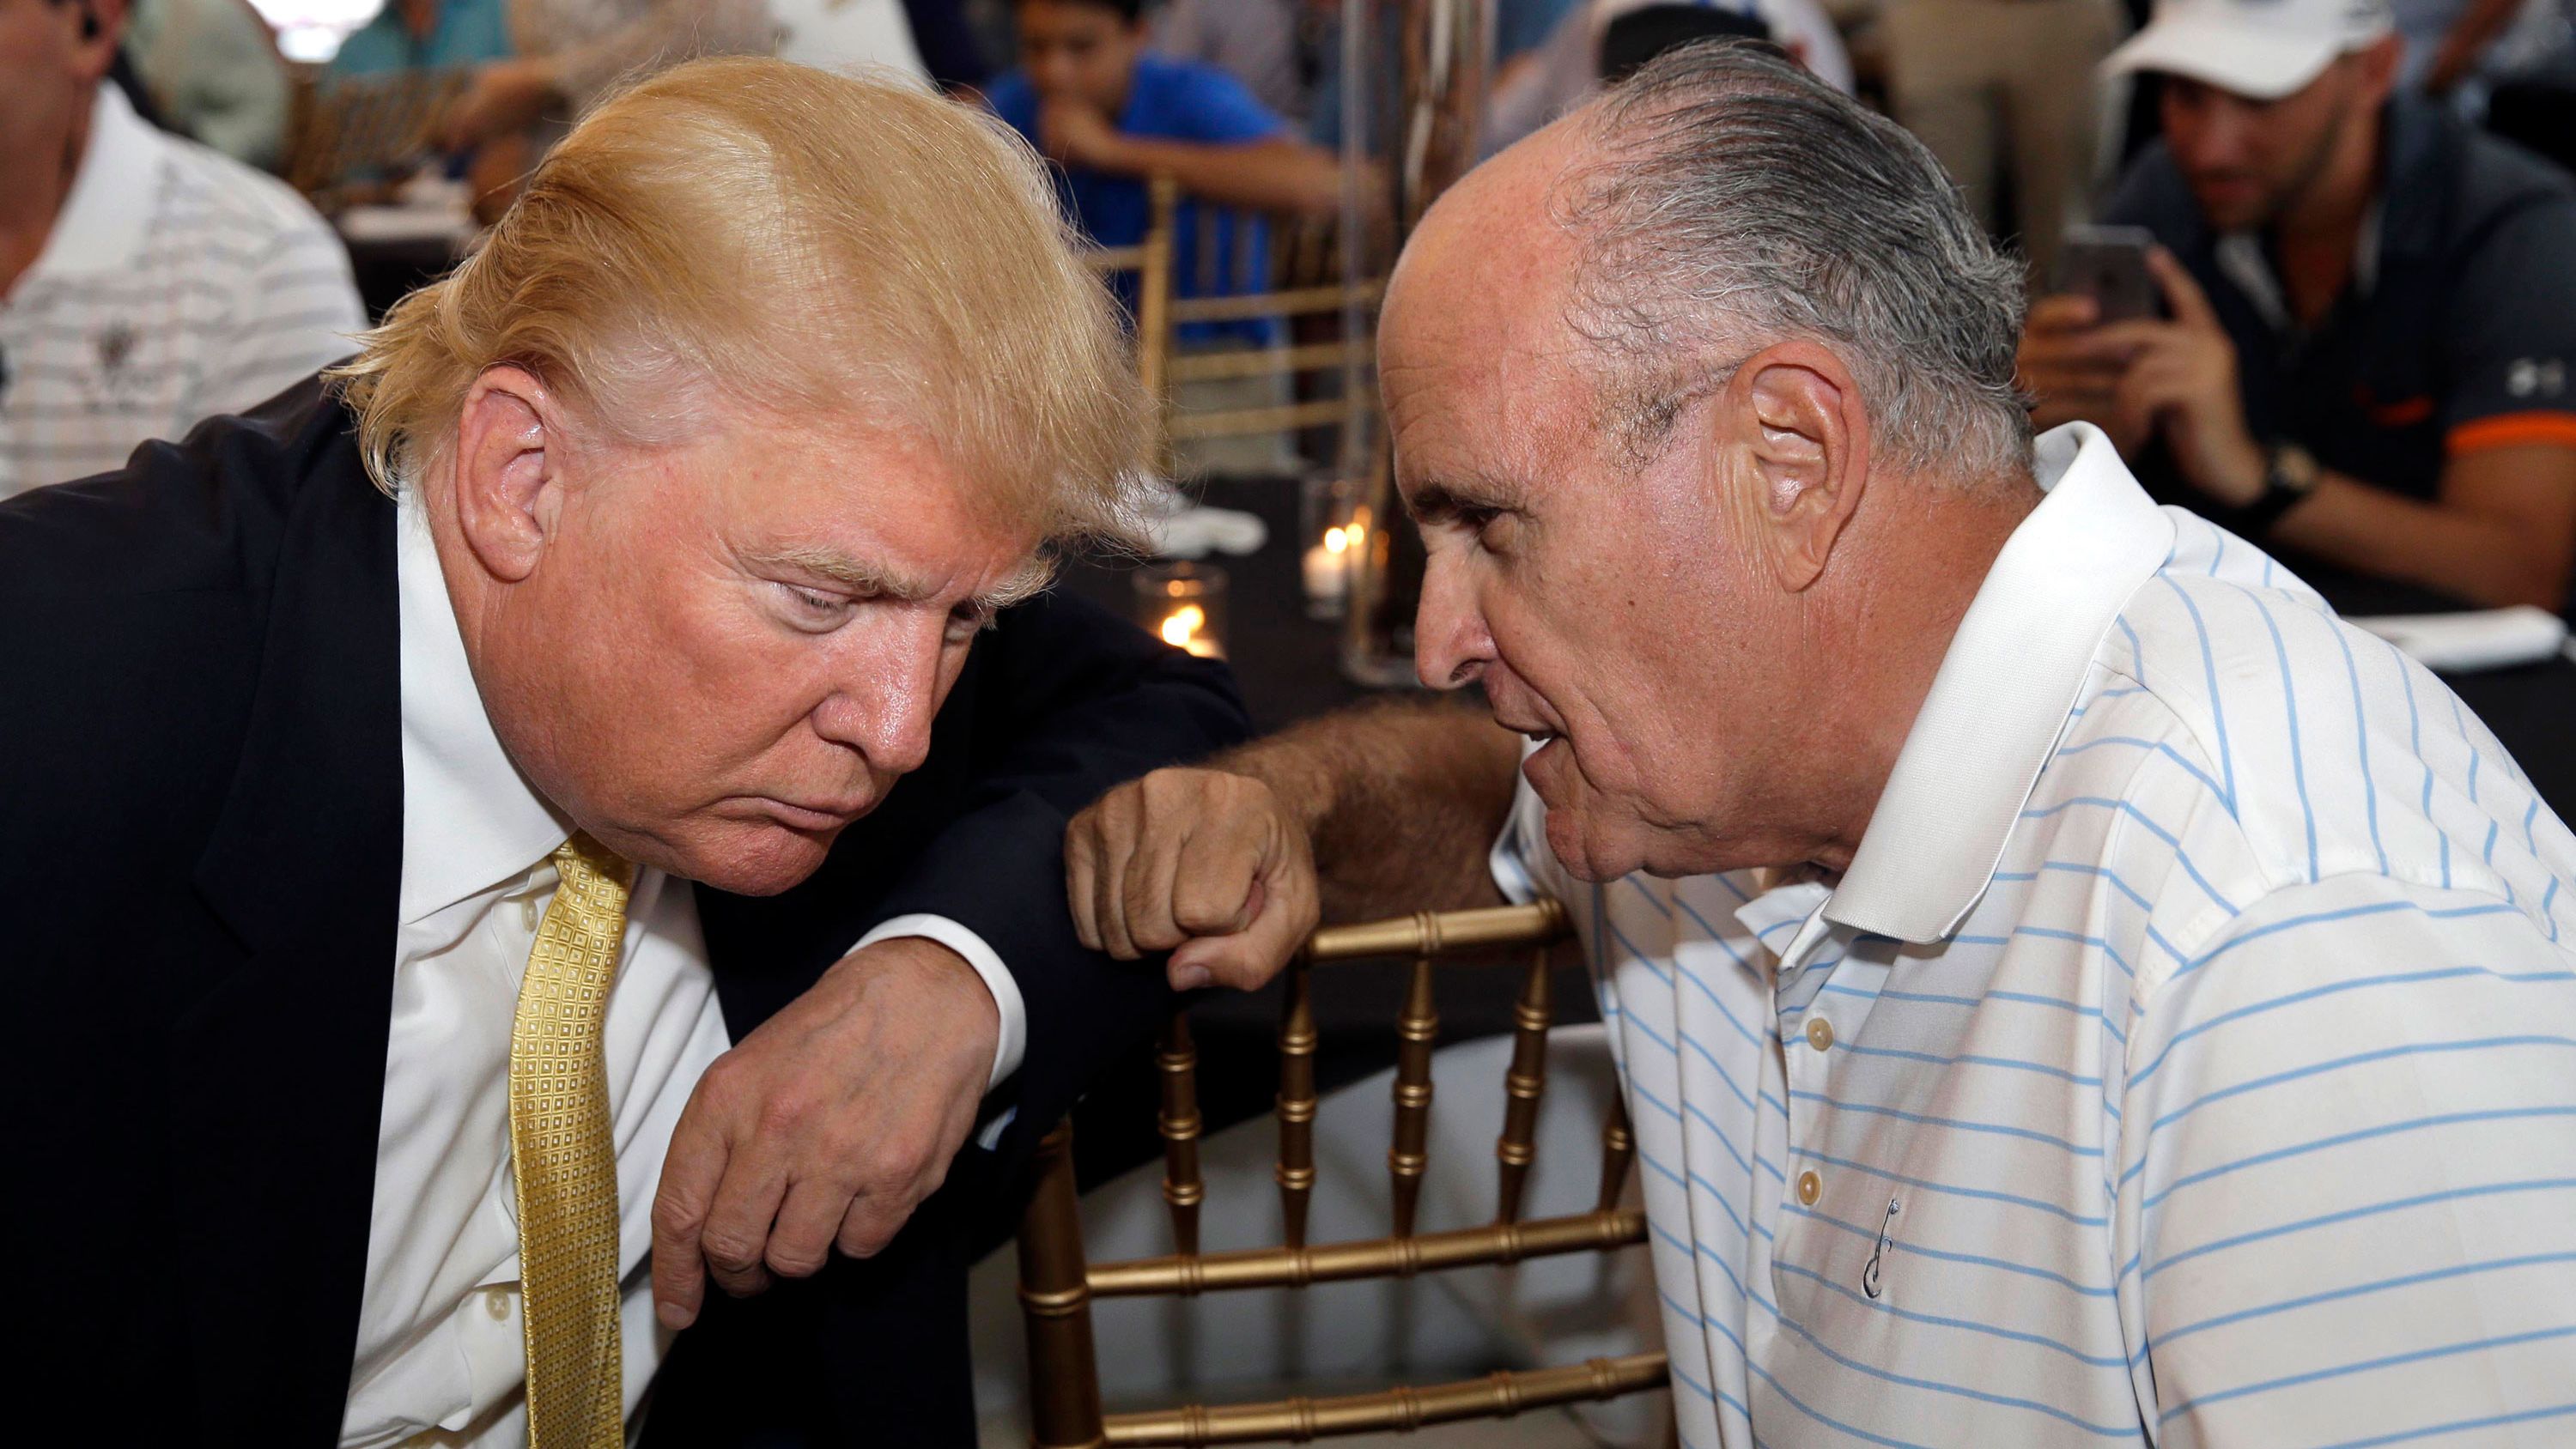 Giuliani talks to Trump at a fundraising event in July 2015. Trump had just announced his presidential campaign a month earlier.